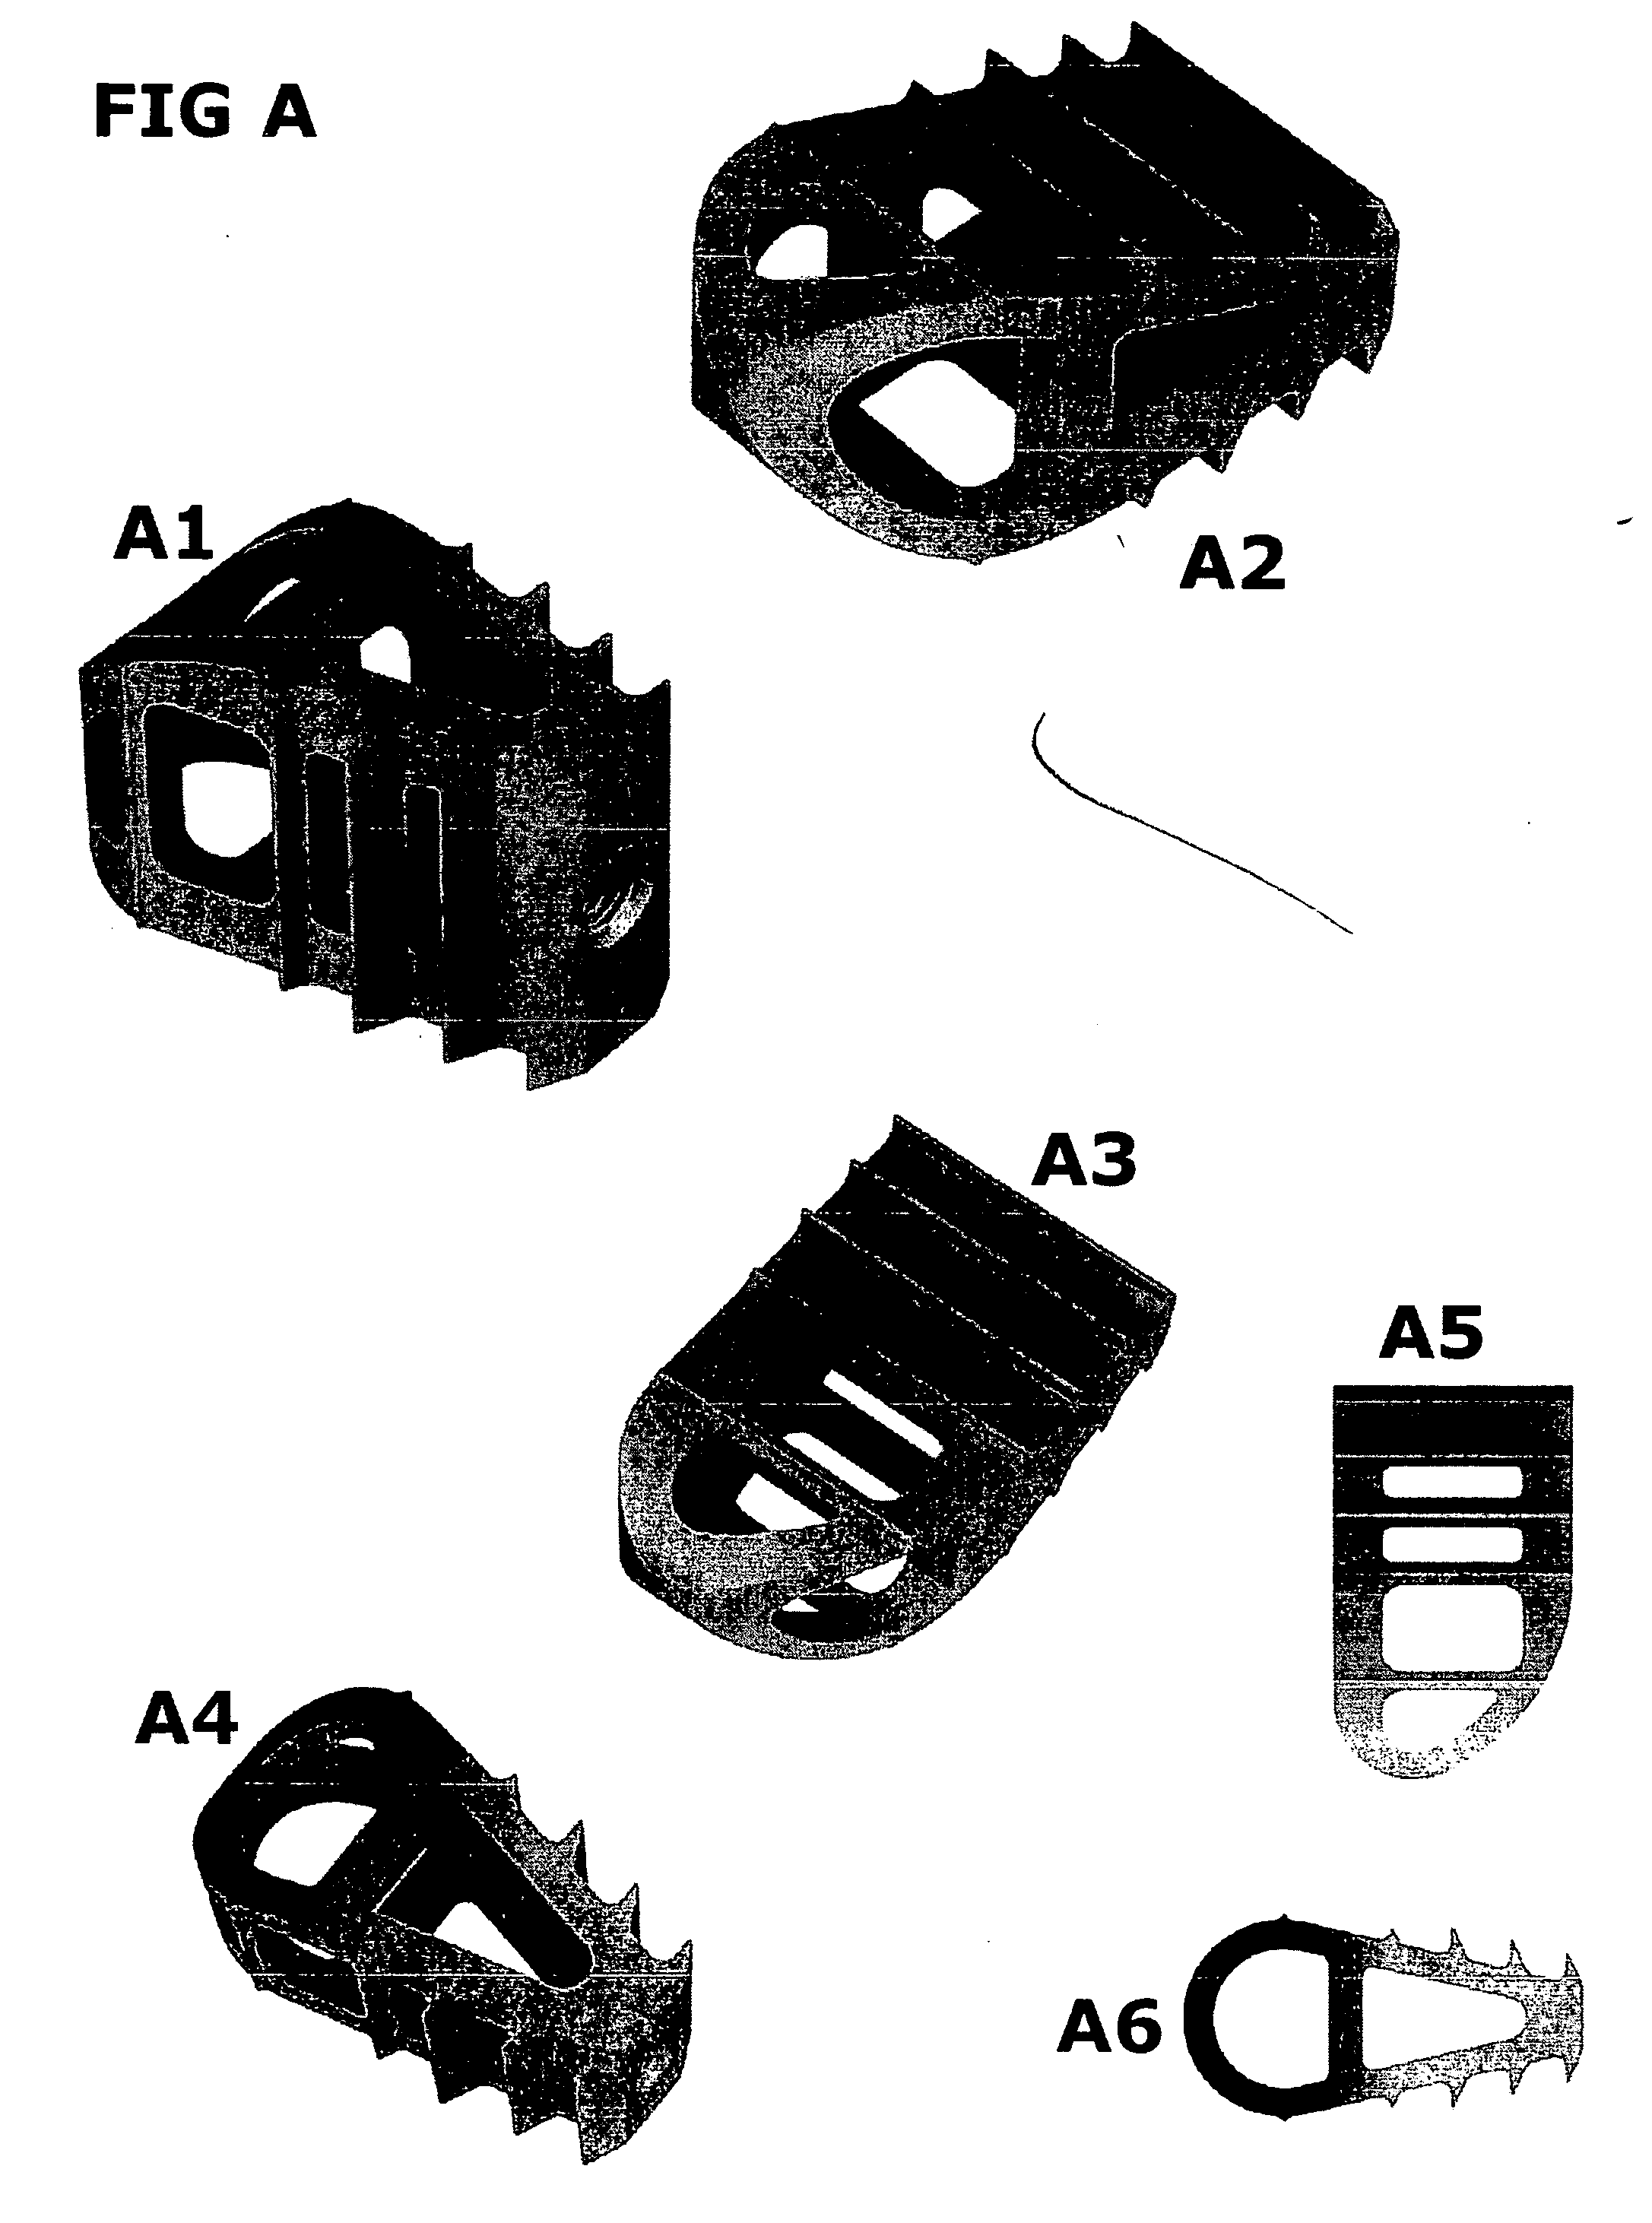 Method for correcting a deformity in the spinal column and its corresponding implant